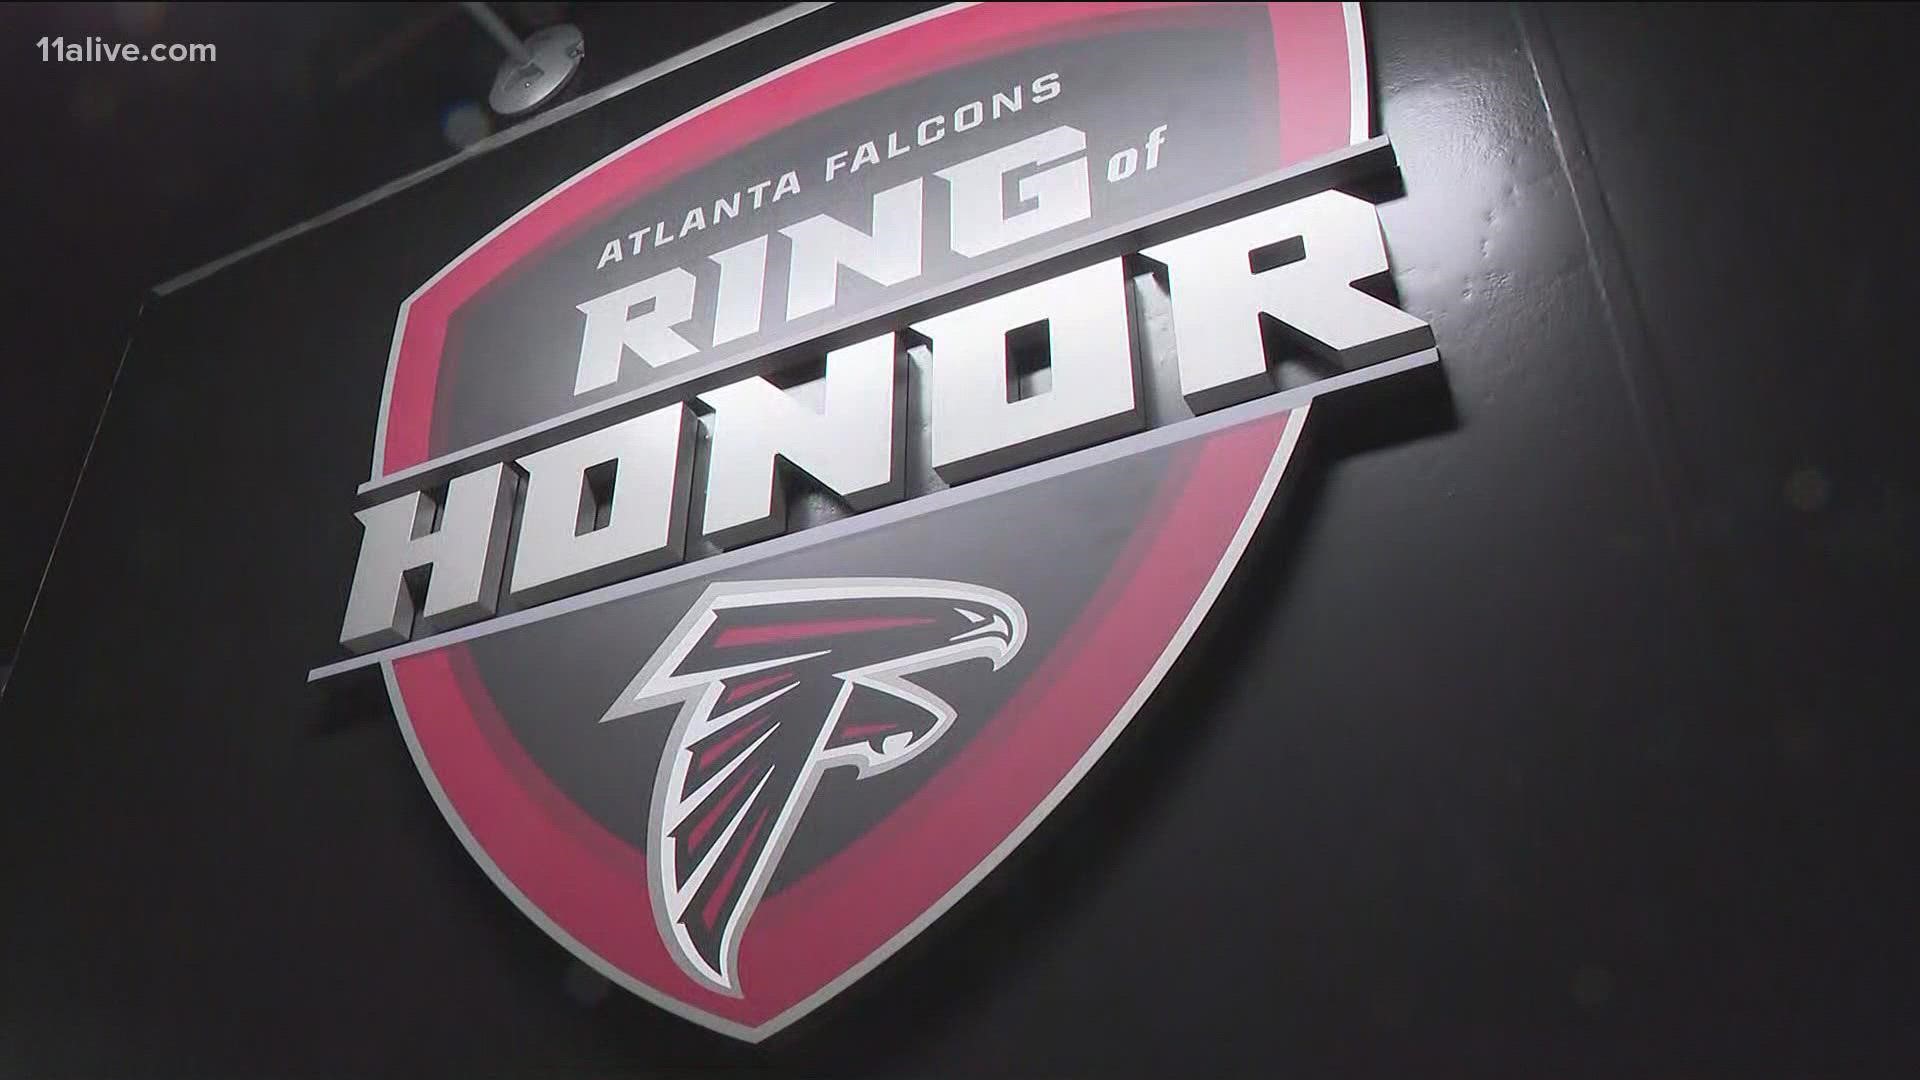 The Falcons used three all-time greats to show off their new Ring of Honor location.